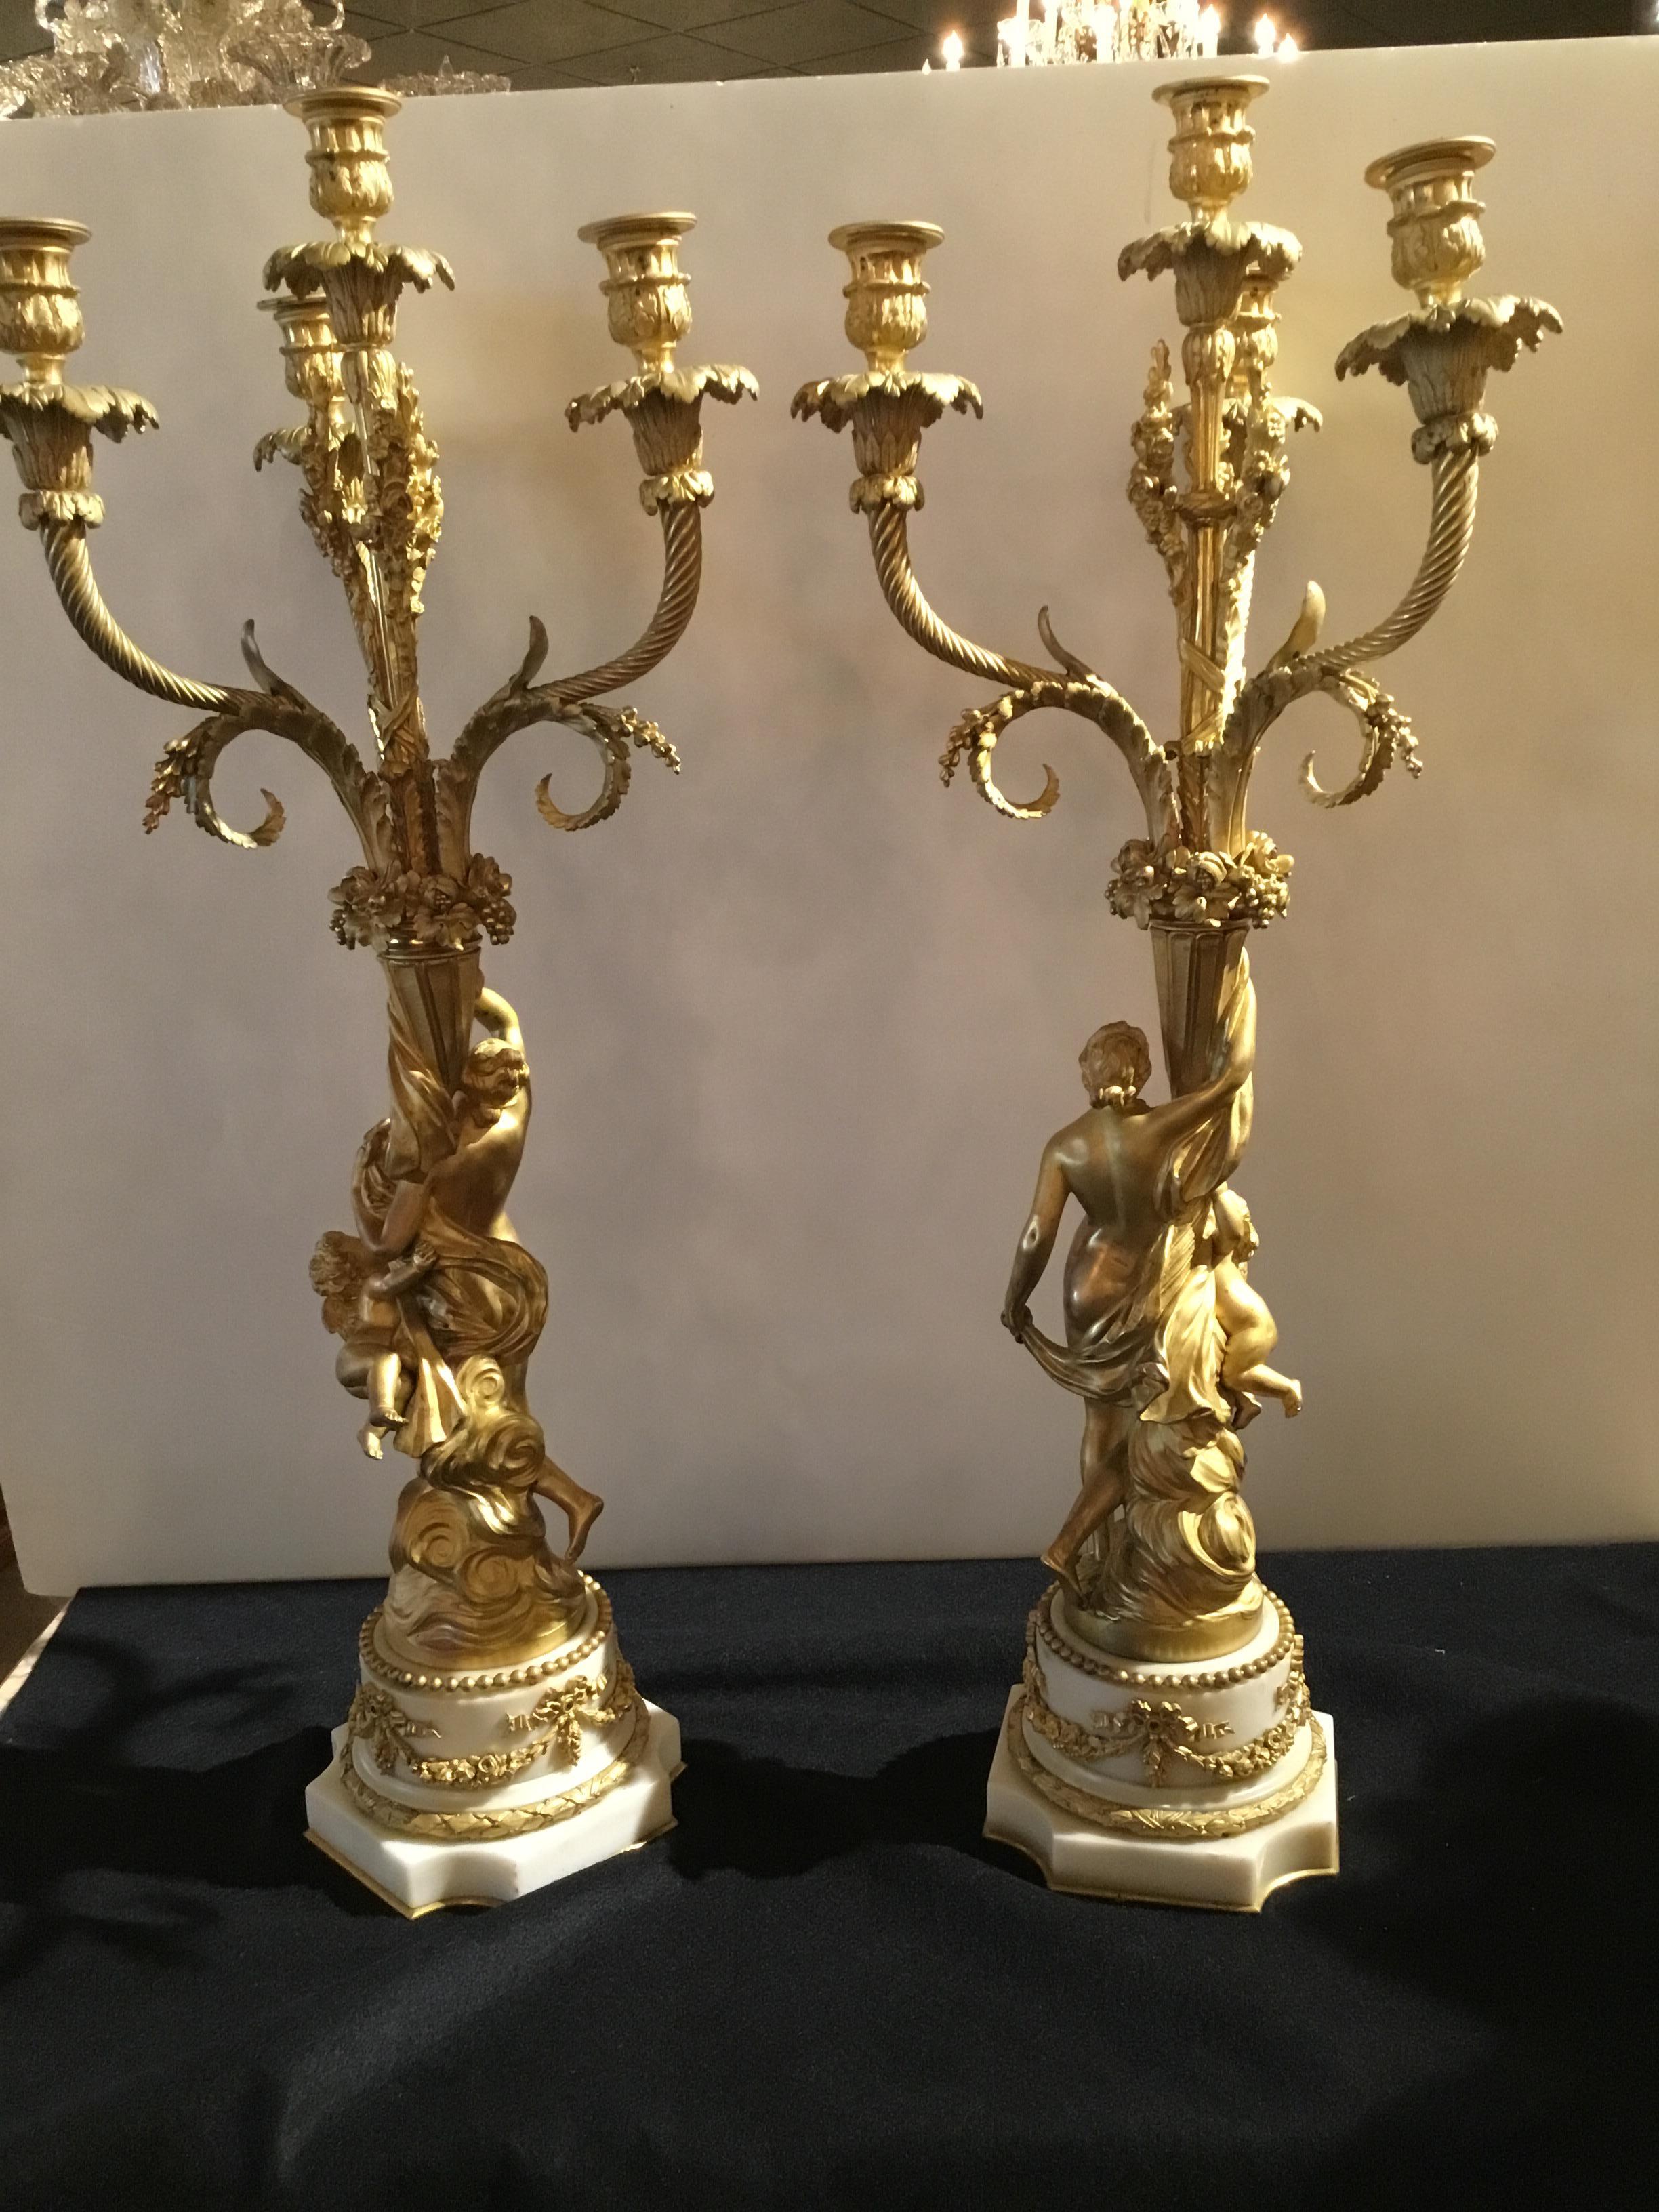 Pair of French Gilt Bronze Figural Candelabra circa 1790 on White Marble Bases 4